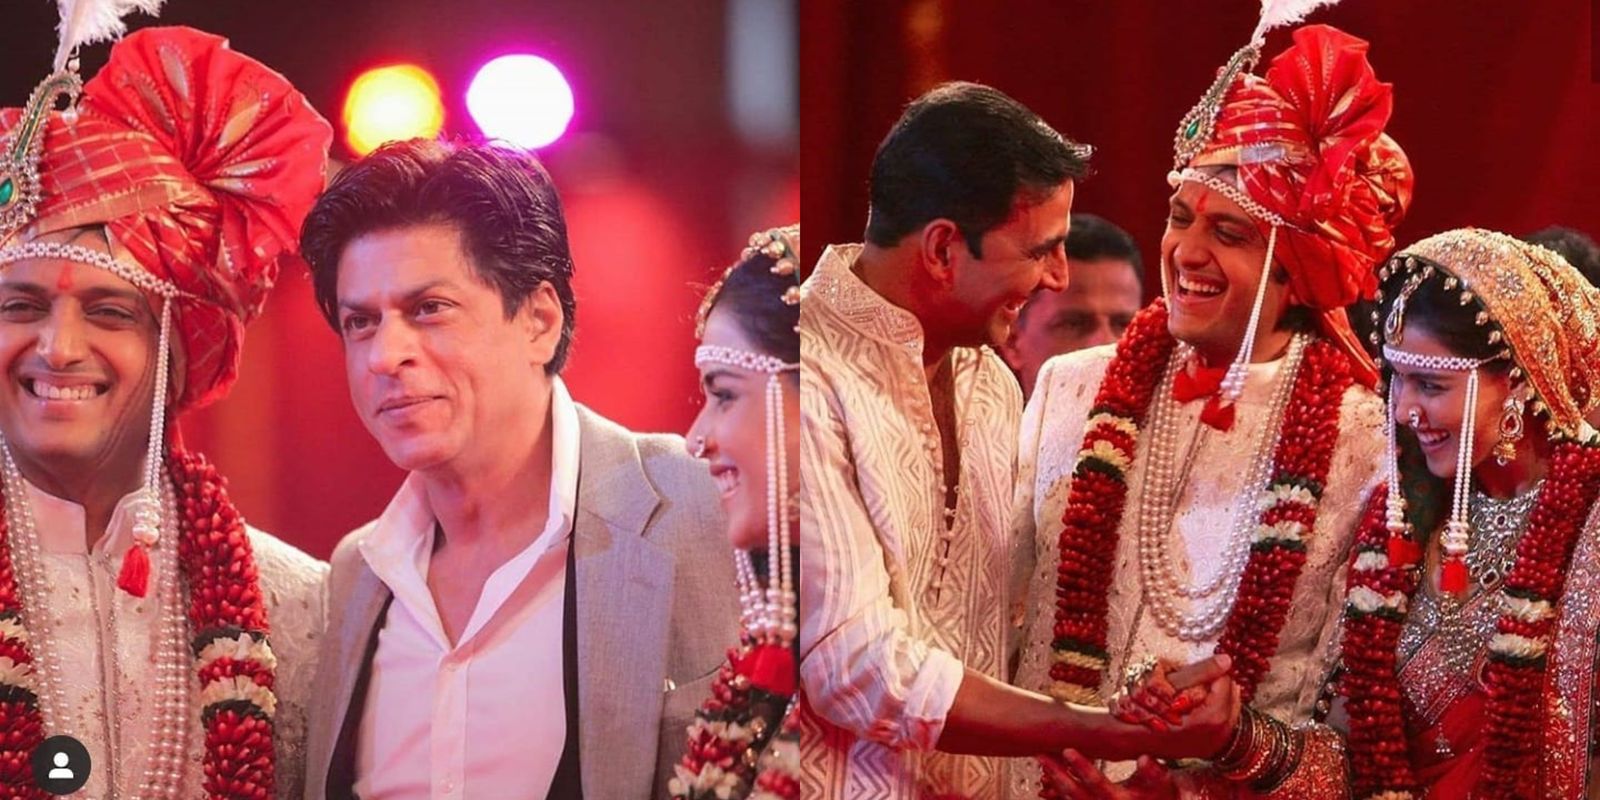 Unseen Pictures Of Shah Rukh, Akshay And Shahid From Riteish Deshmukh And Genelia D’souza’s Wedding Surface Online